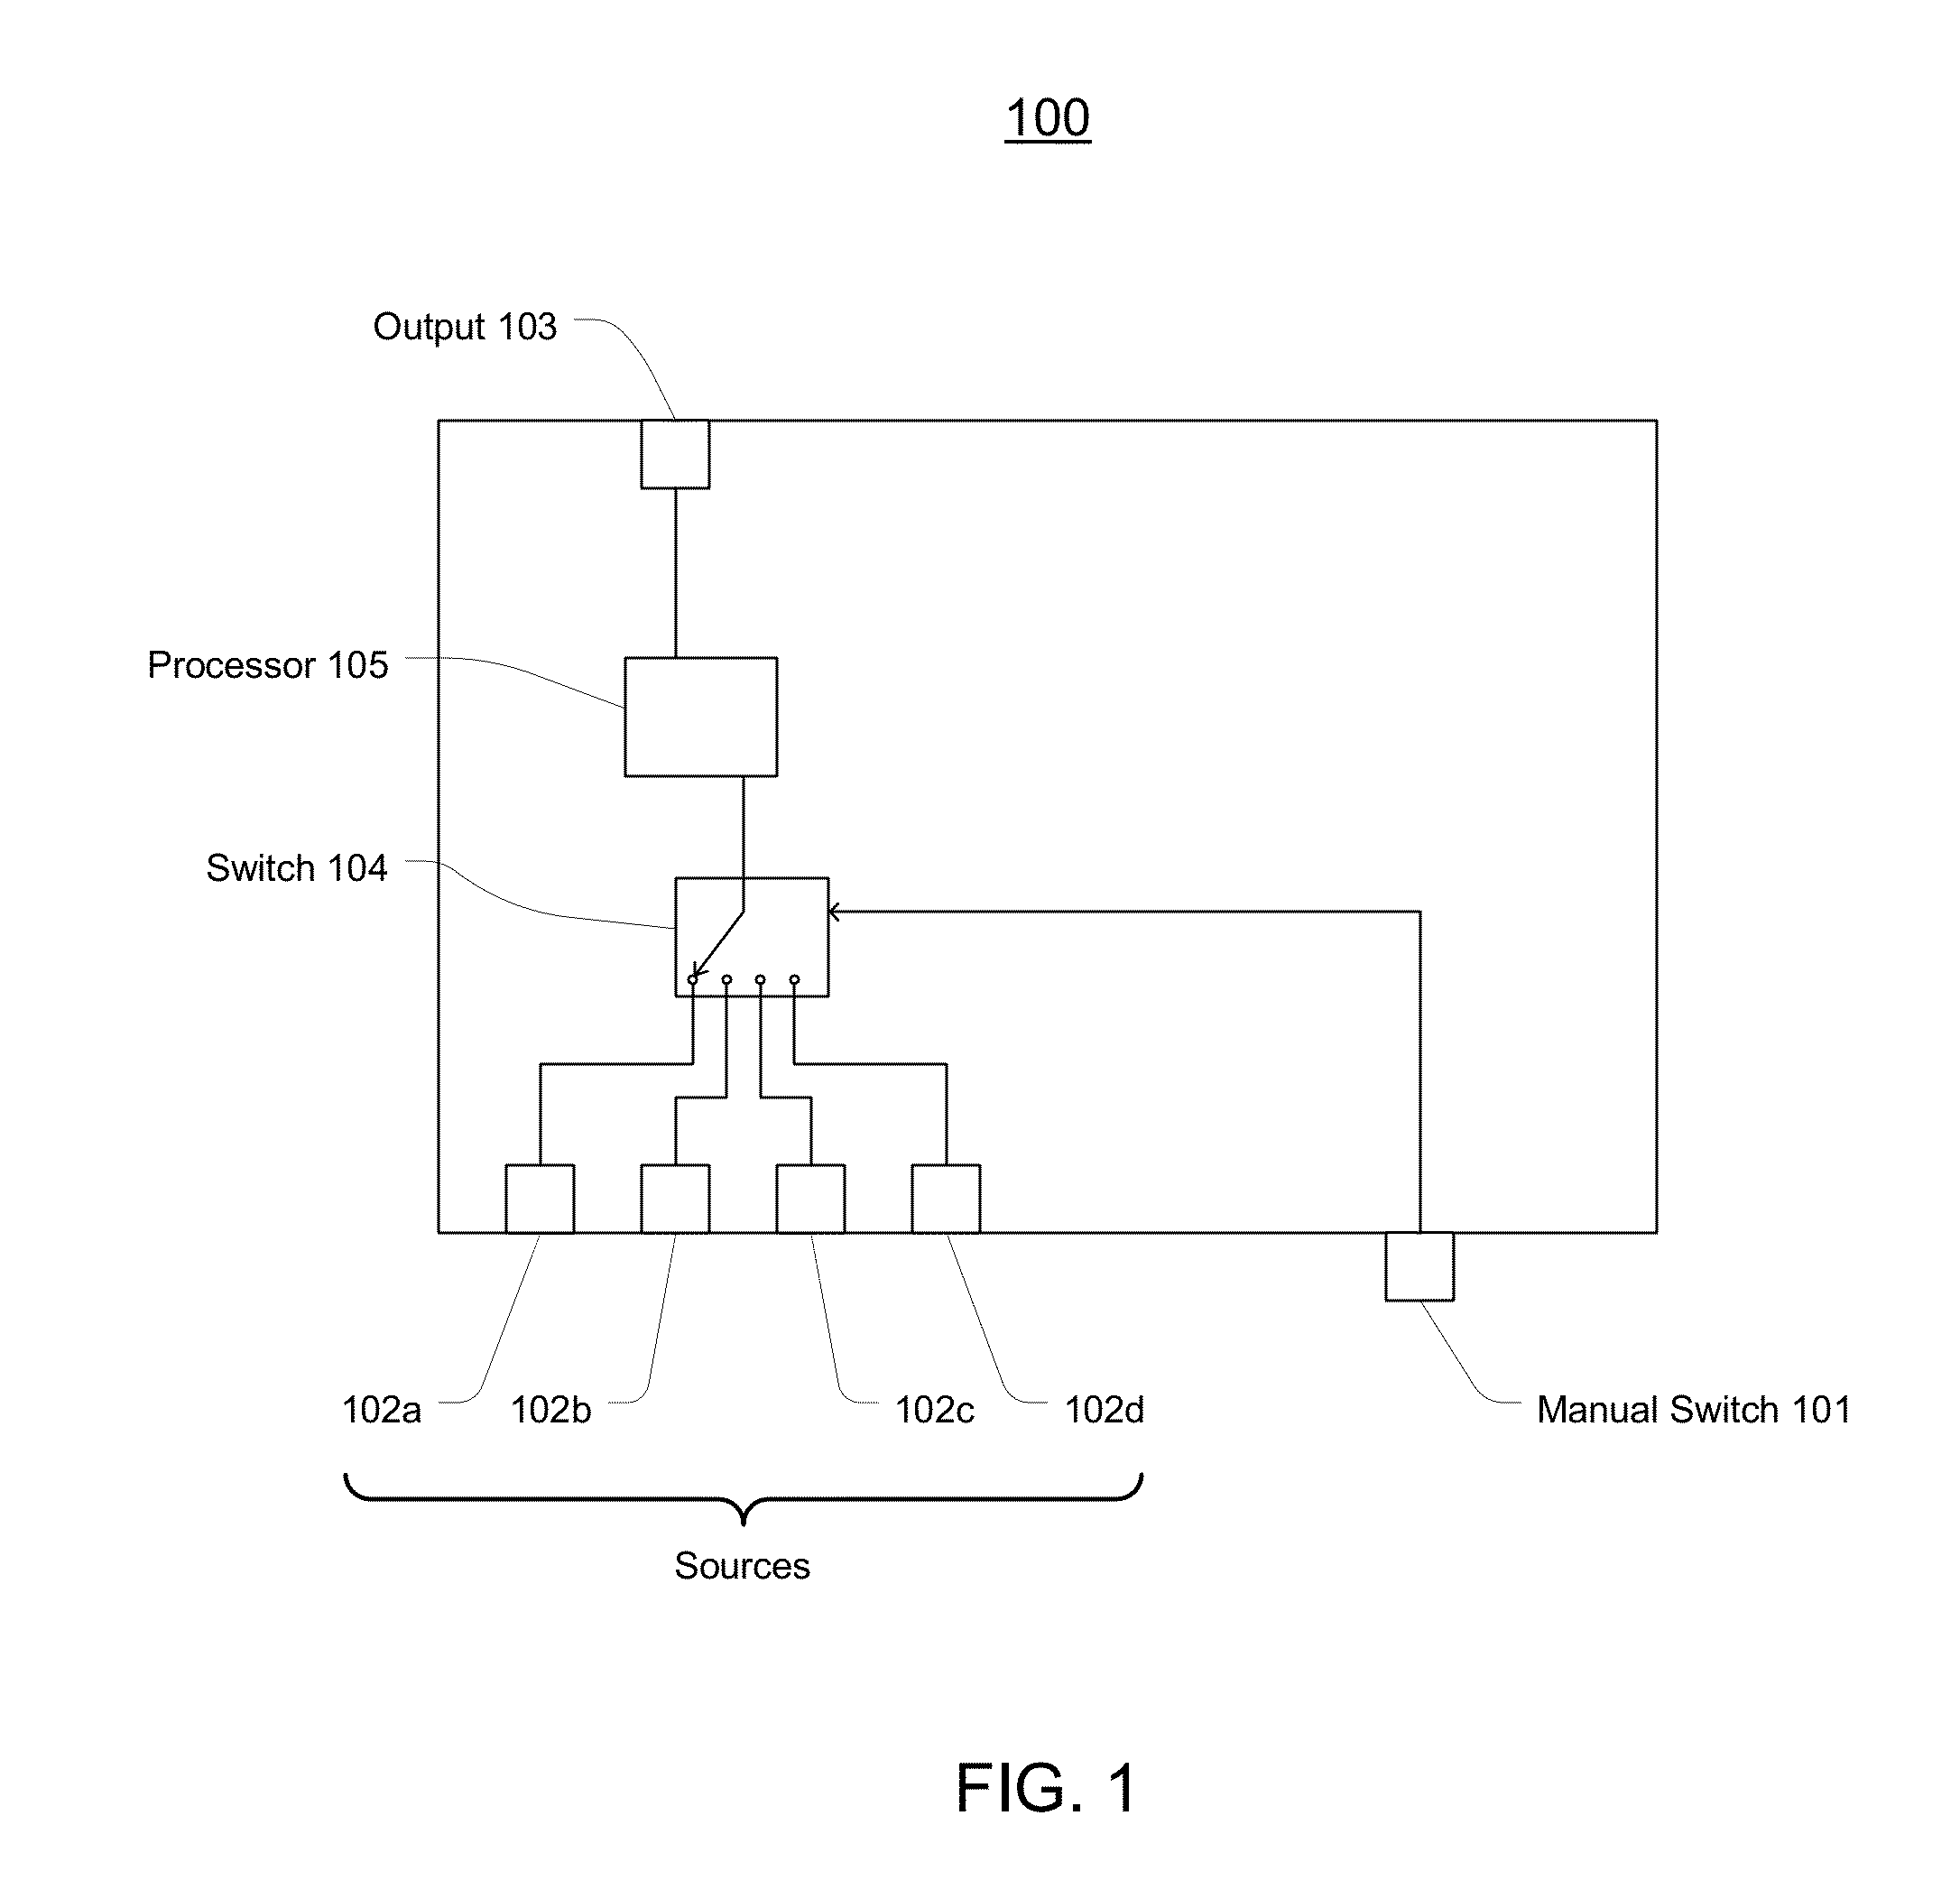 Manual Switch System for Outputting Multimedia Content to a Digital Sign